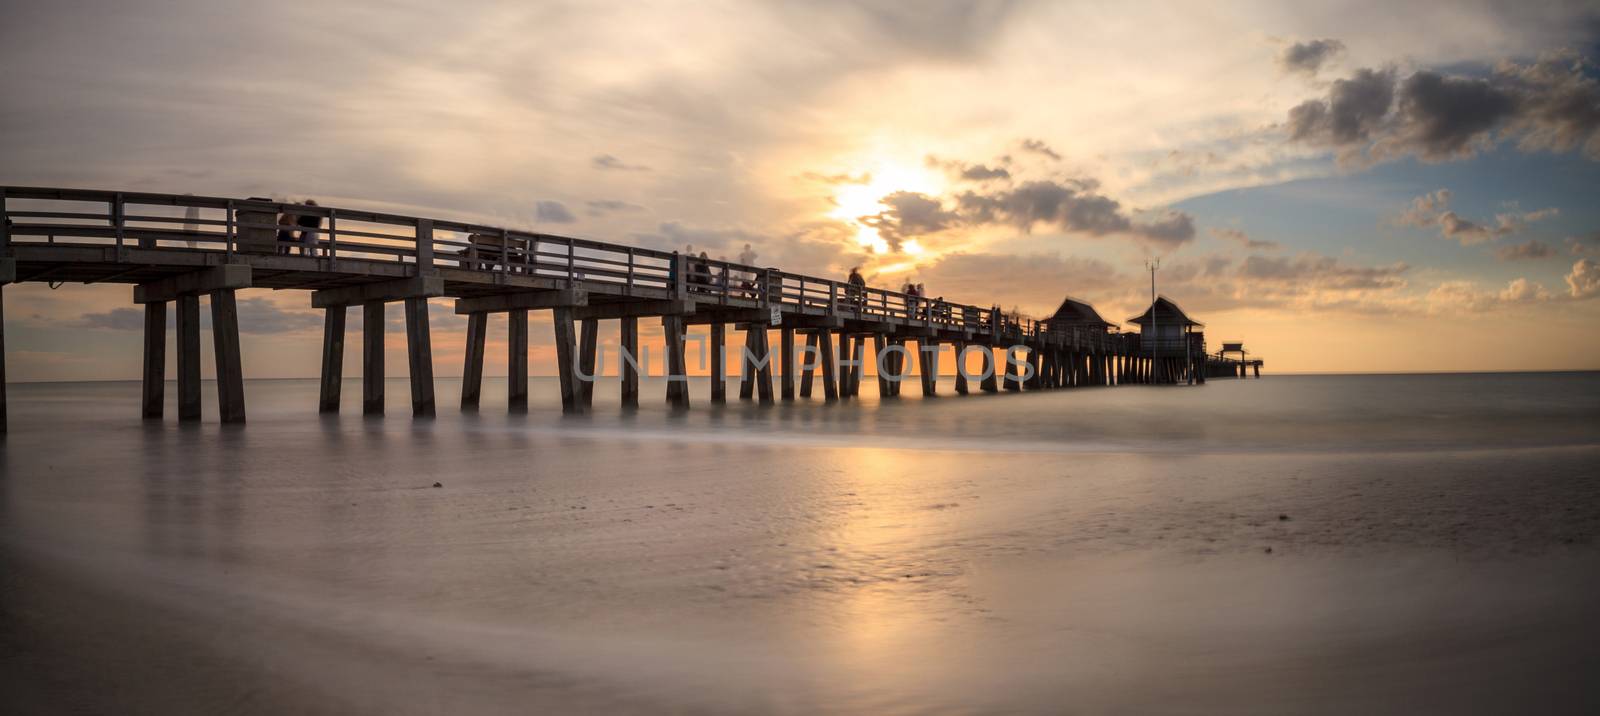 Naples Pier on the beach at sunset in Naples, Florida, USA